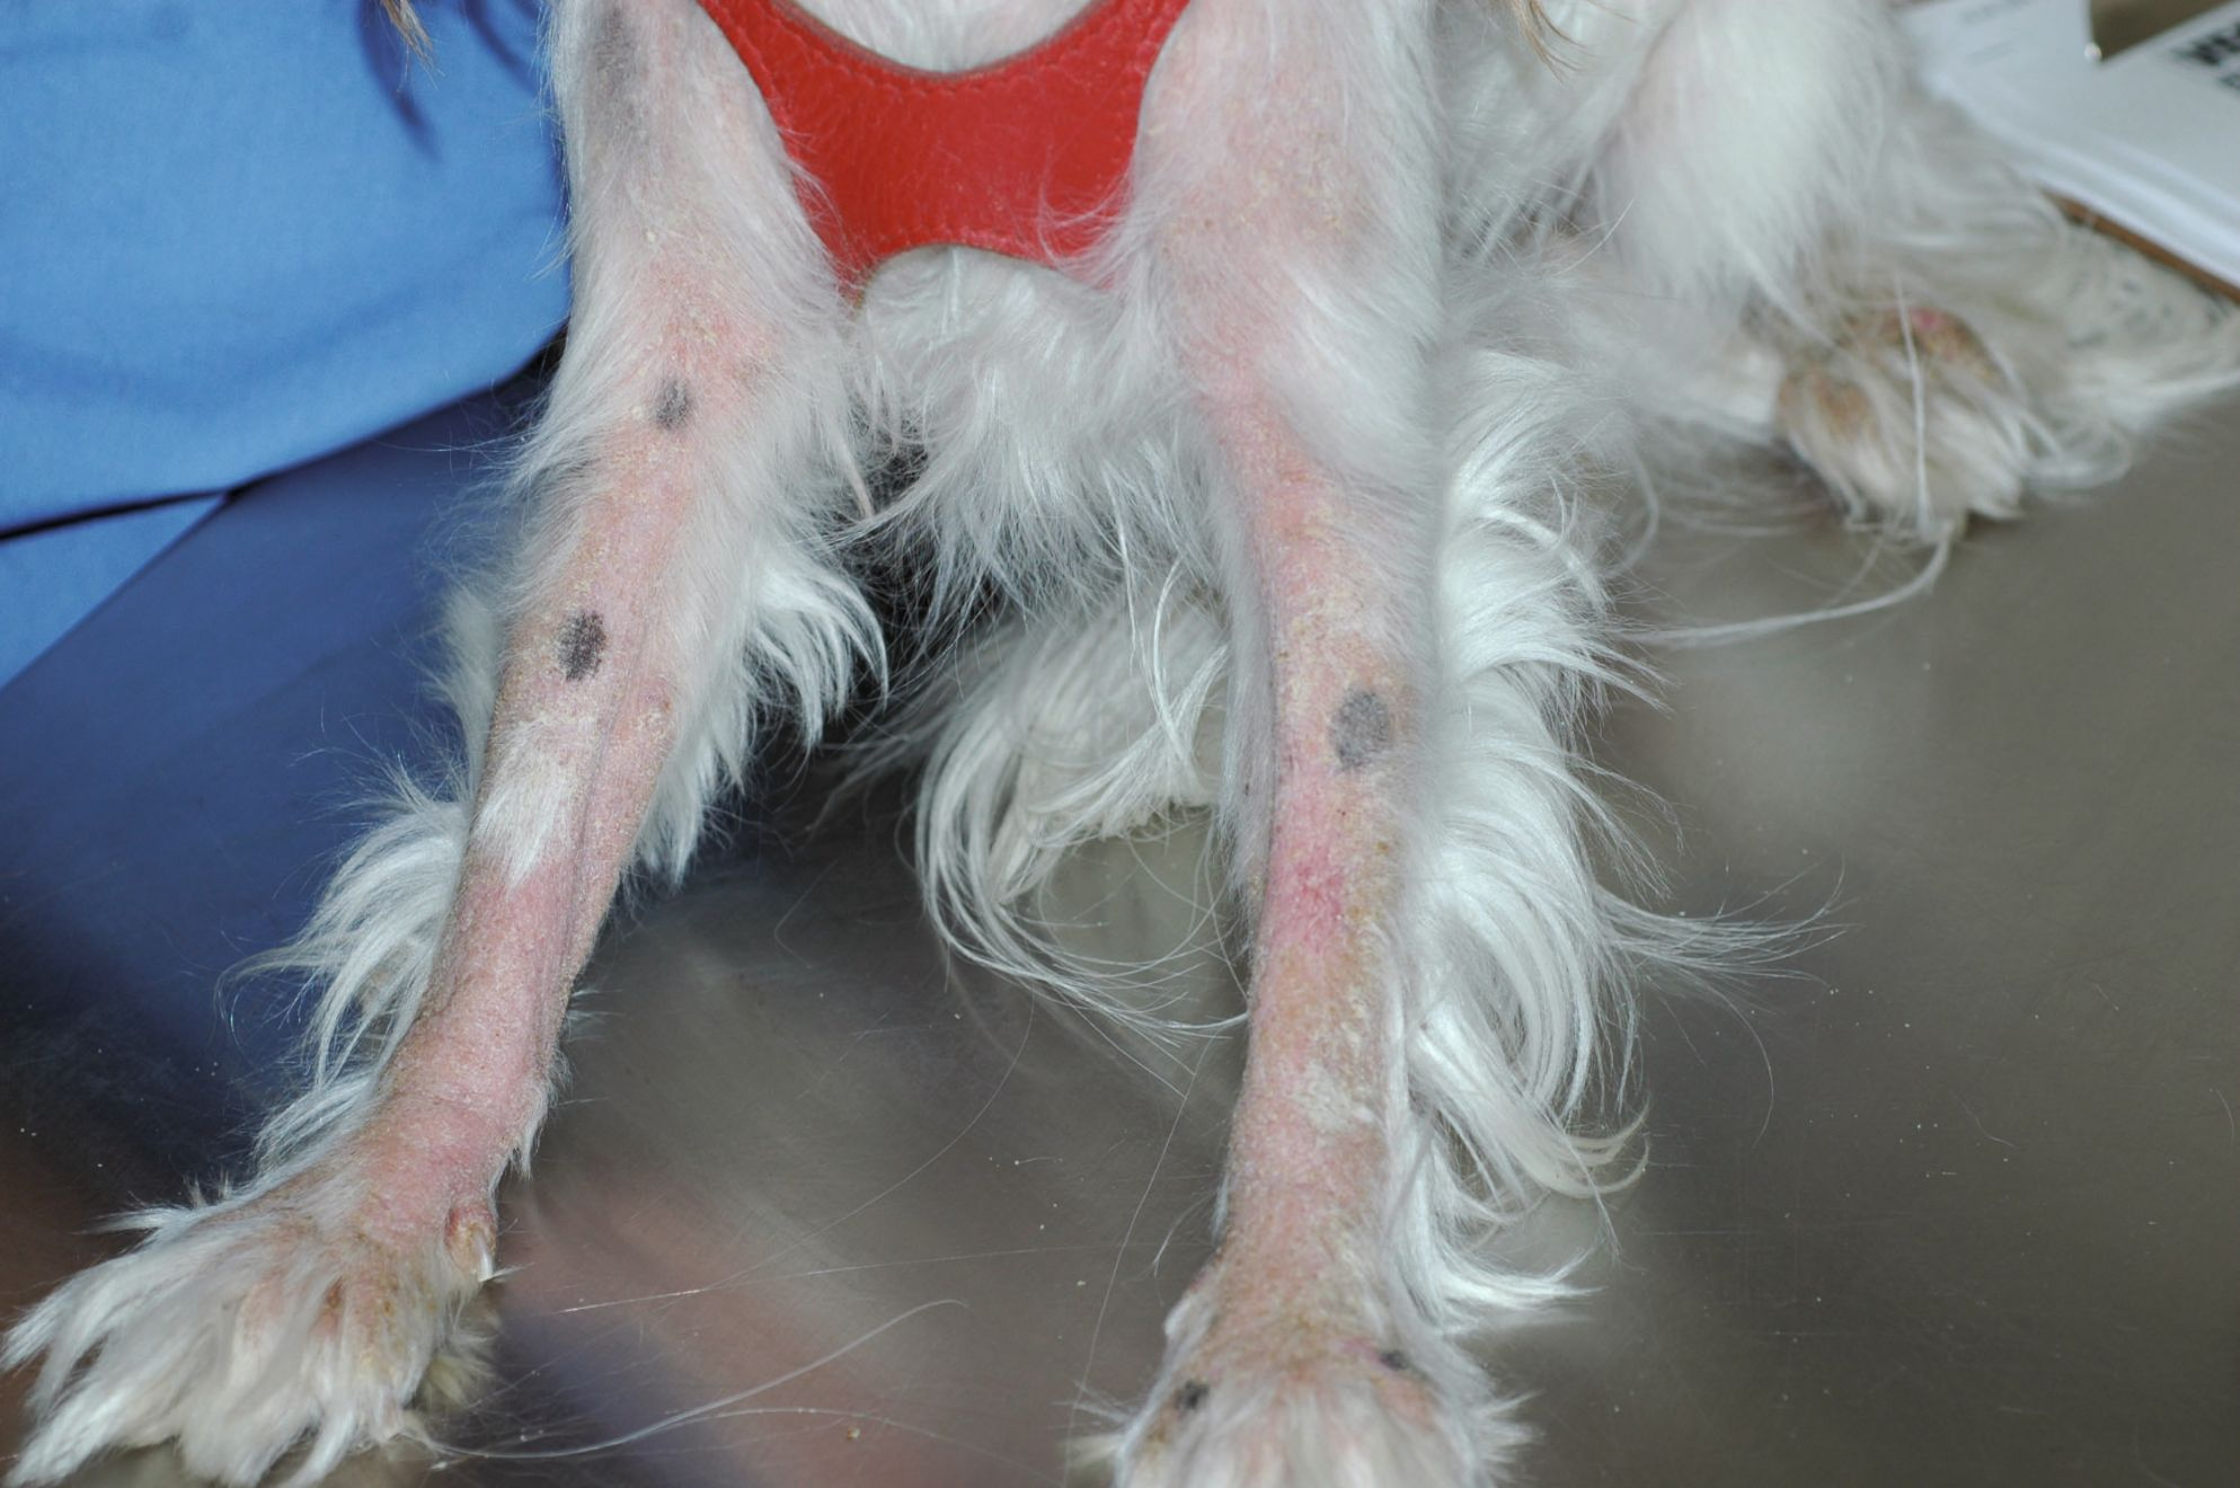 A common presentation of pets with demodicosis is a scaling dermatosis.